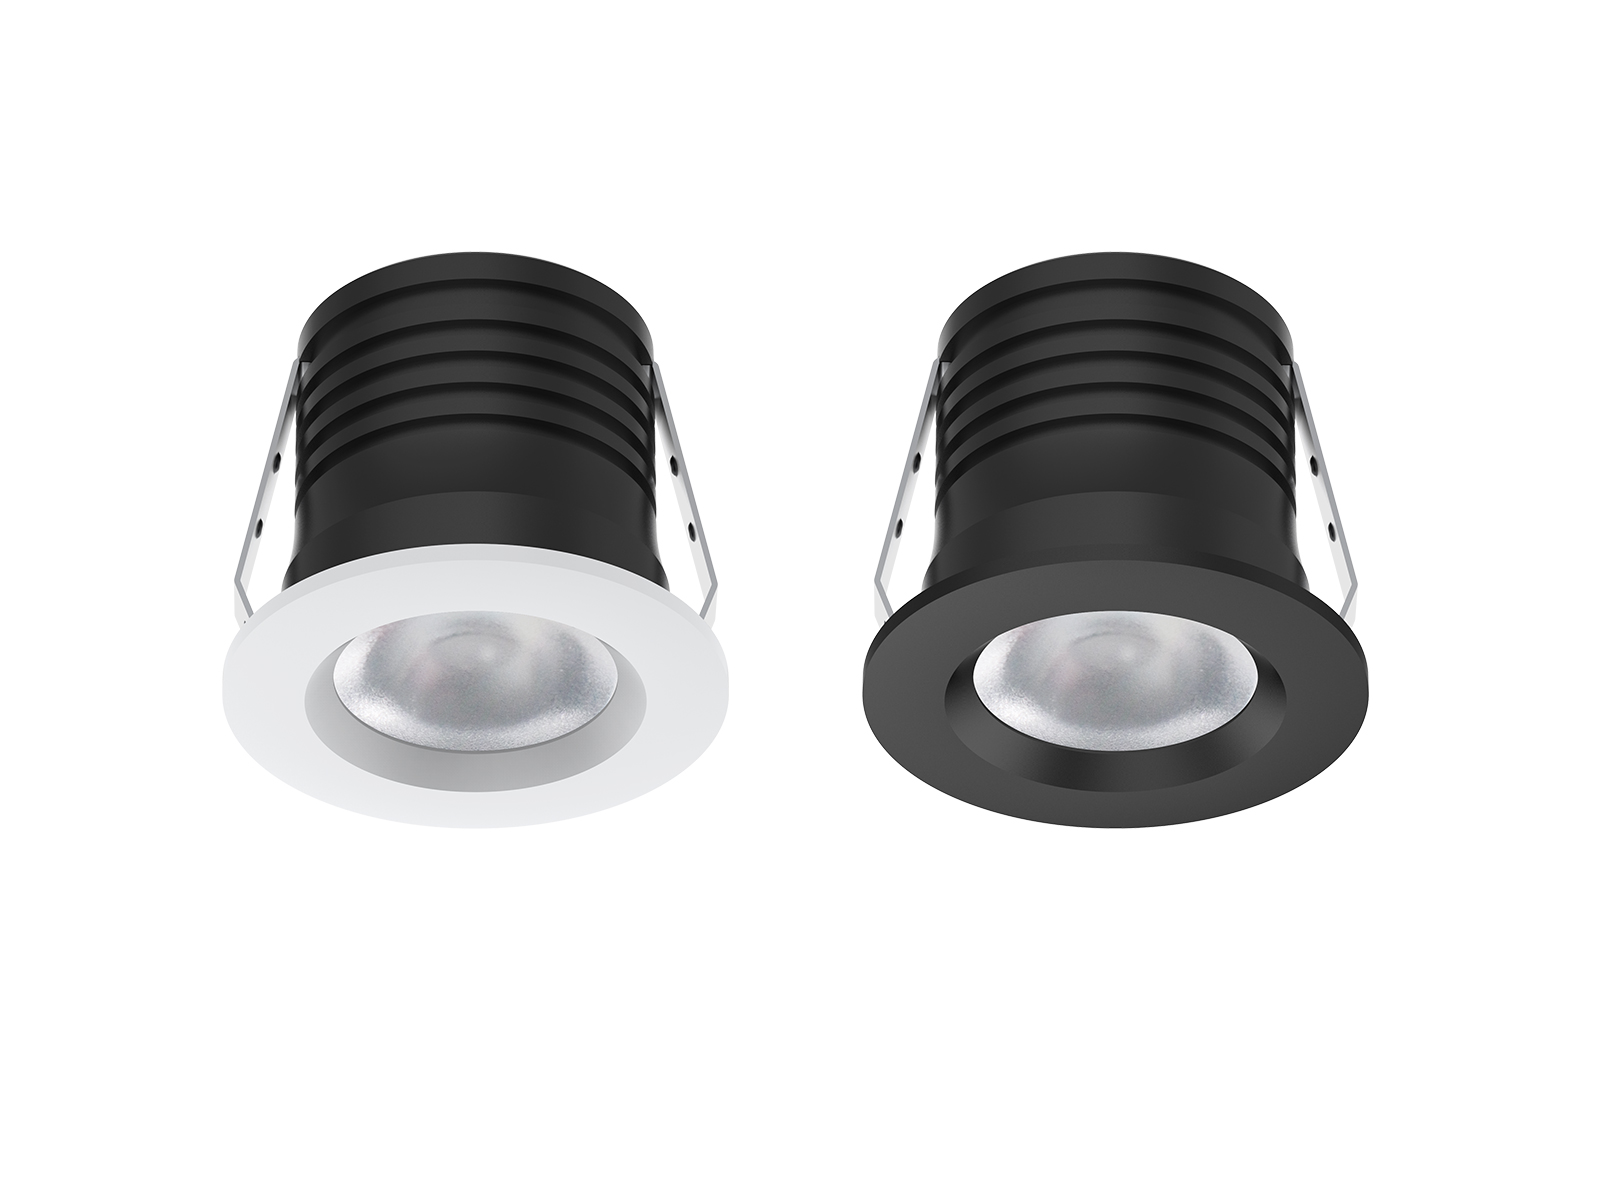 DL278 shopping mall wifi downlights